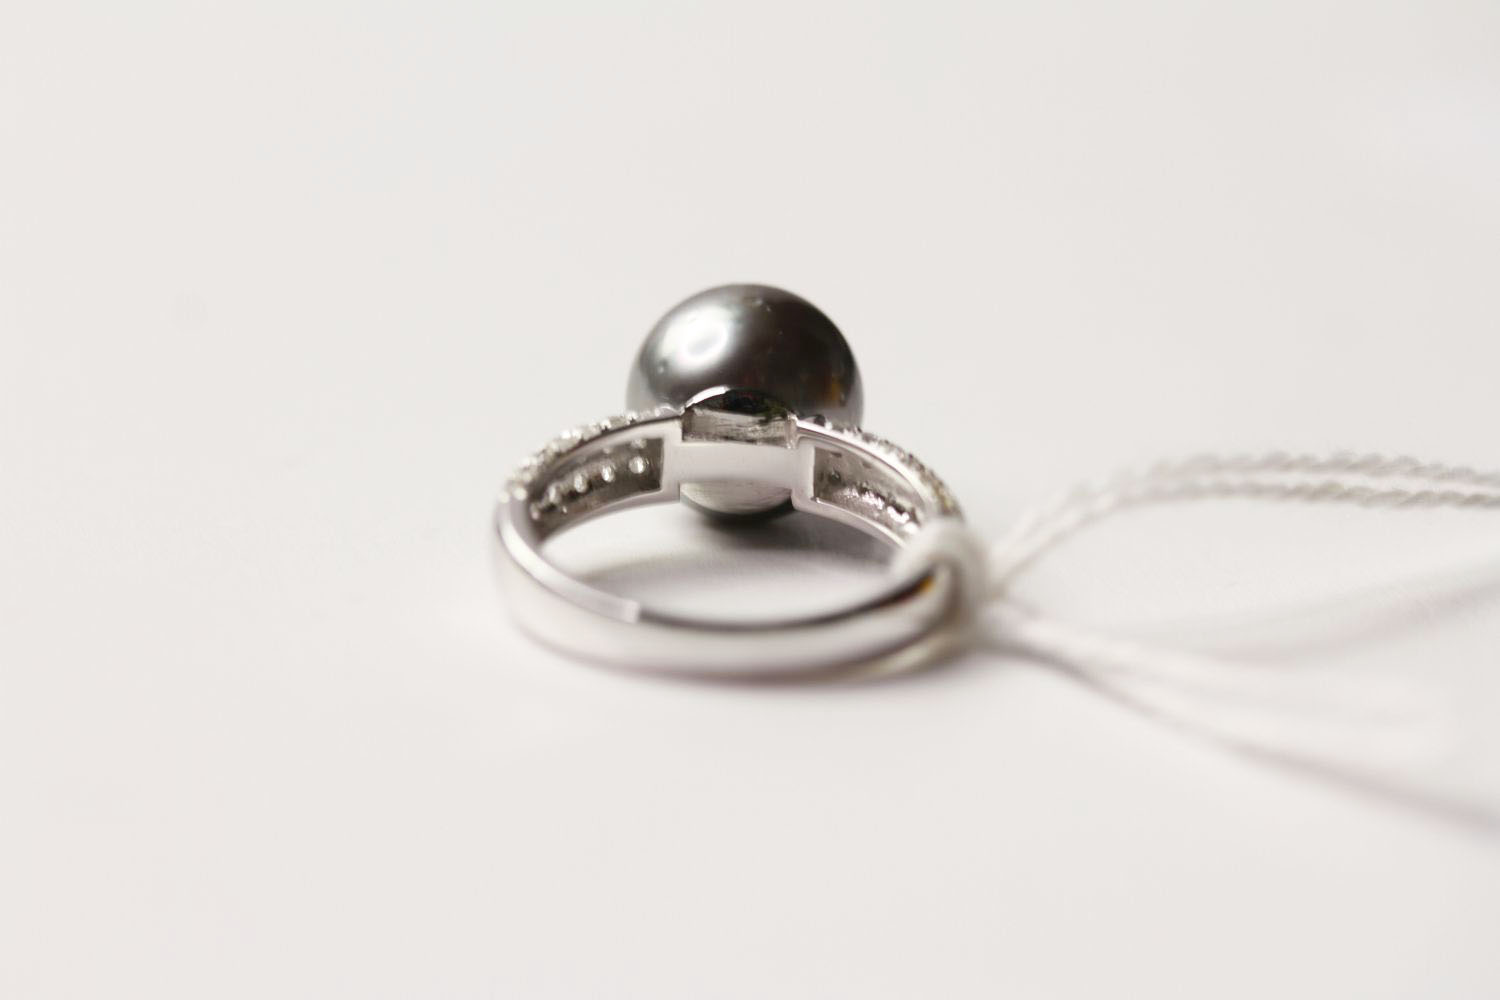 Tahitian Pearl & Diamond Ring, set with a cultured tahitian pearl, 56 round brilliant cut diamonds - Image 2 of 3